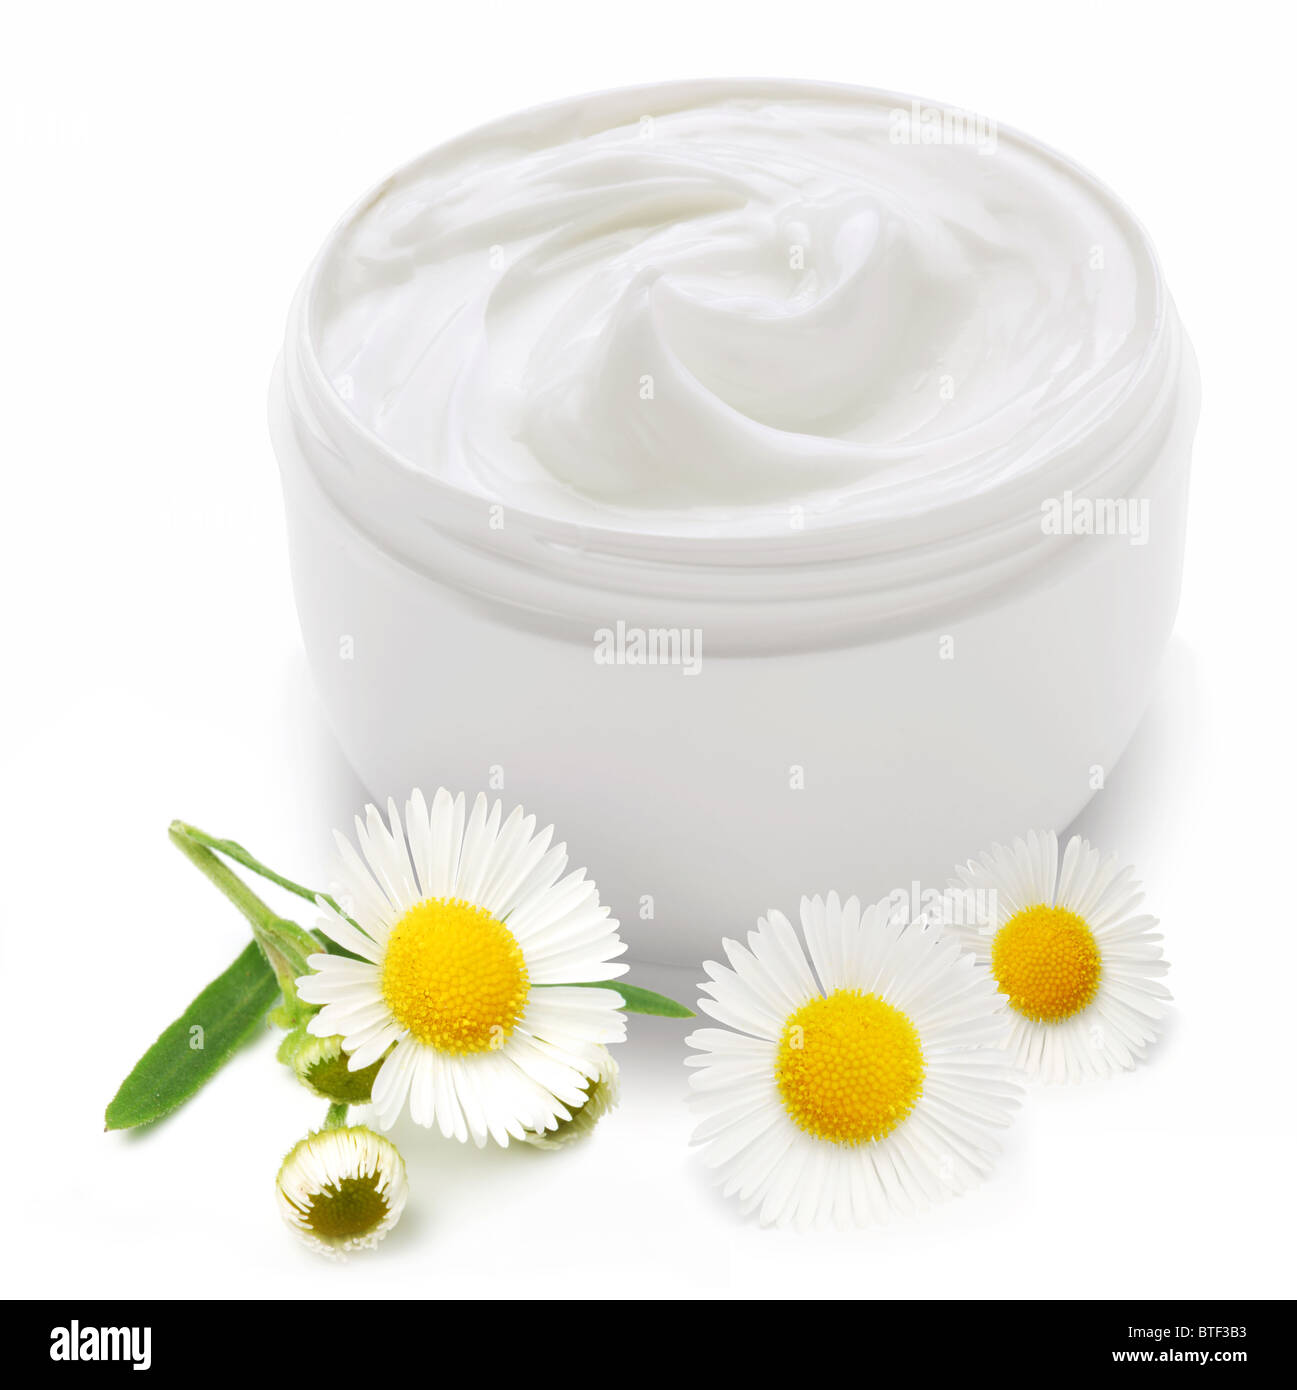 Opened plastic container with cream and camomile on a white background. Stock Photo